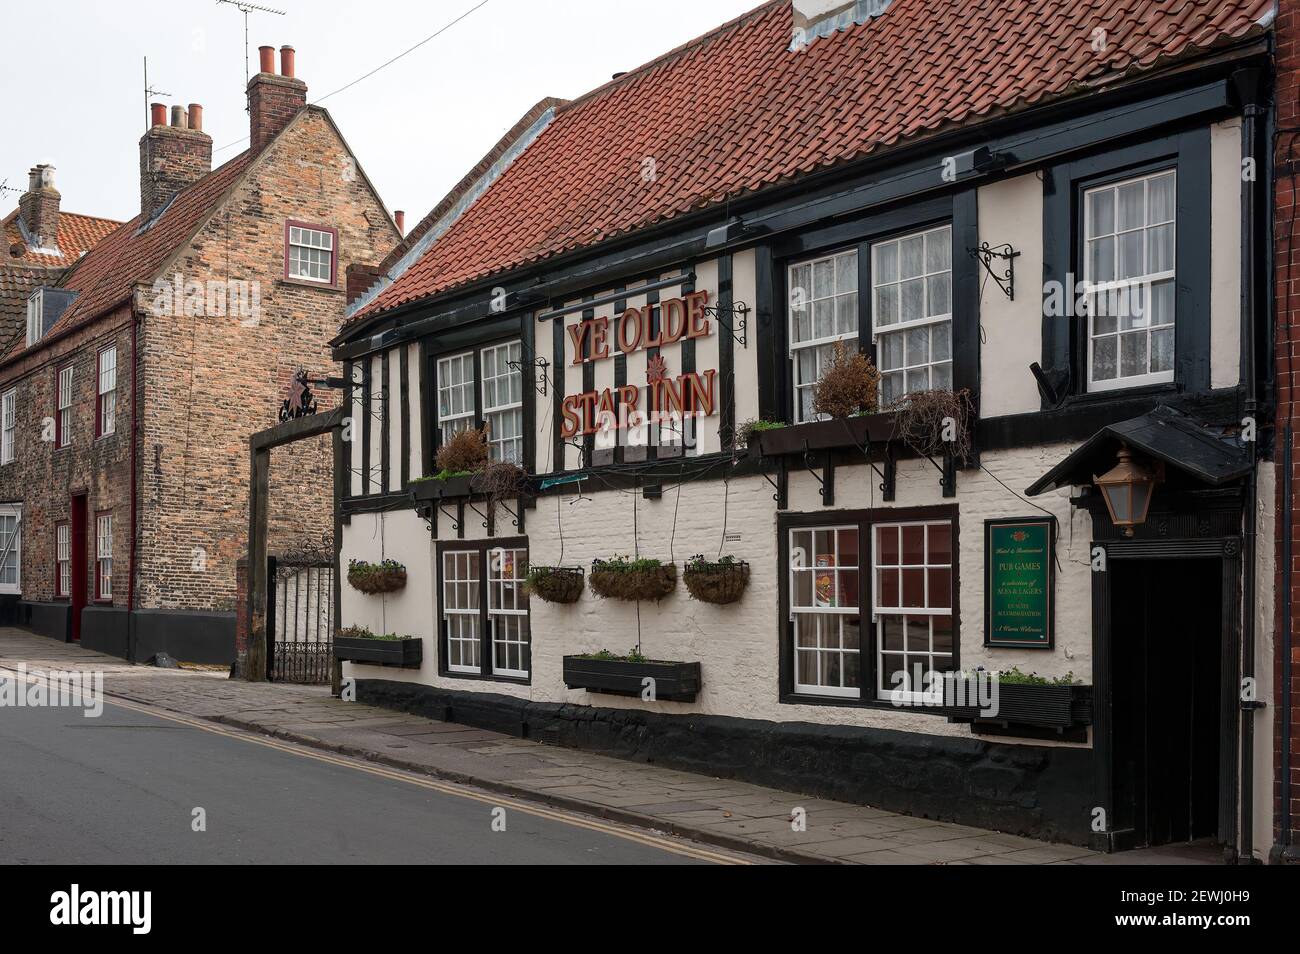 BRIDLINGTON, NORTH YORKSHIRE, UK - MARCH 19, 2010:  Exterior view of Ye Olde Star Inn Hotel in Bridlington Old Town Stock Photo